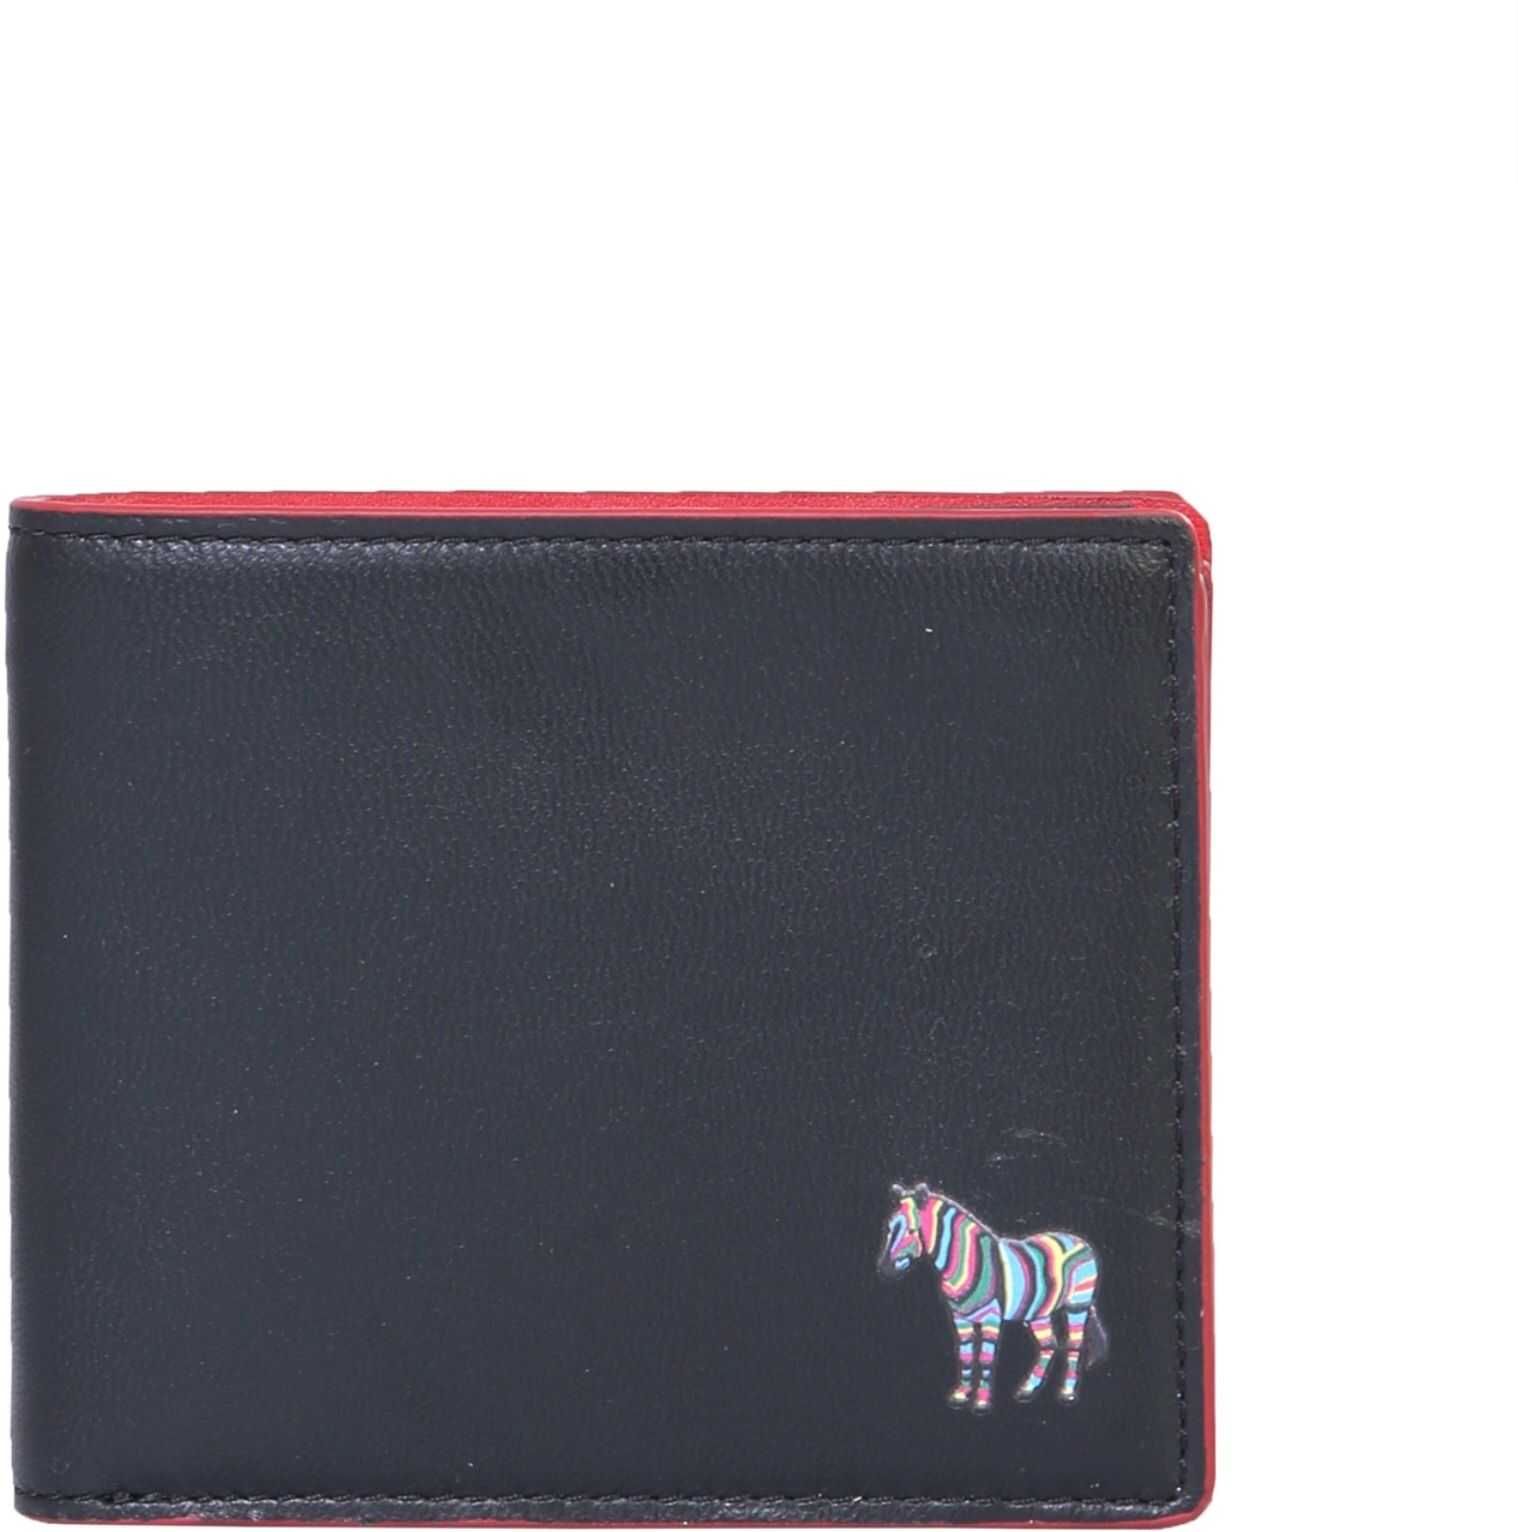 PS by Paul Smith Bifold Wallet BLACK